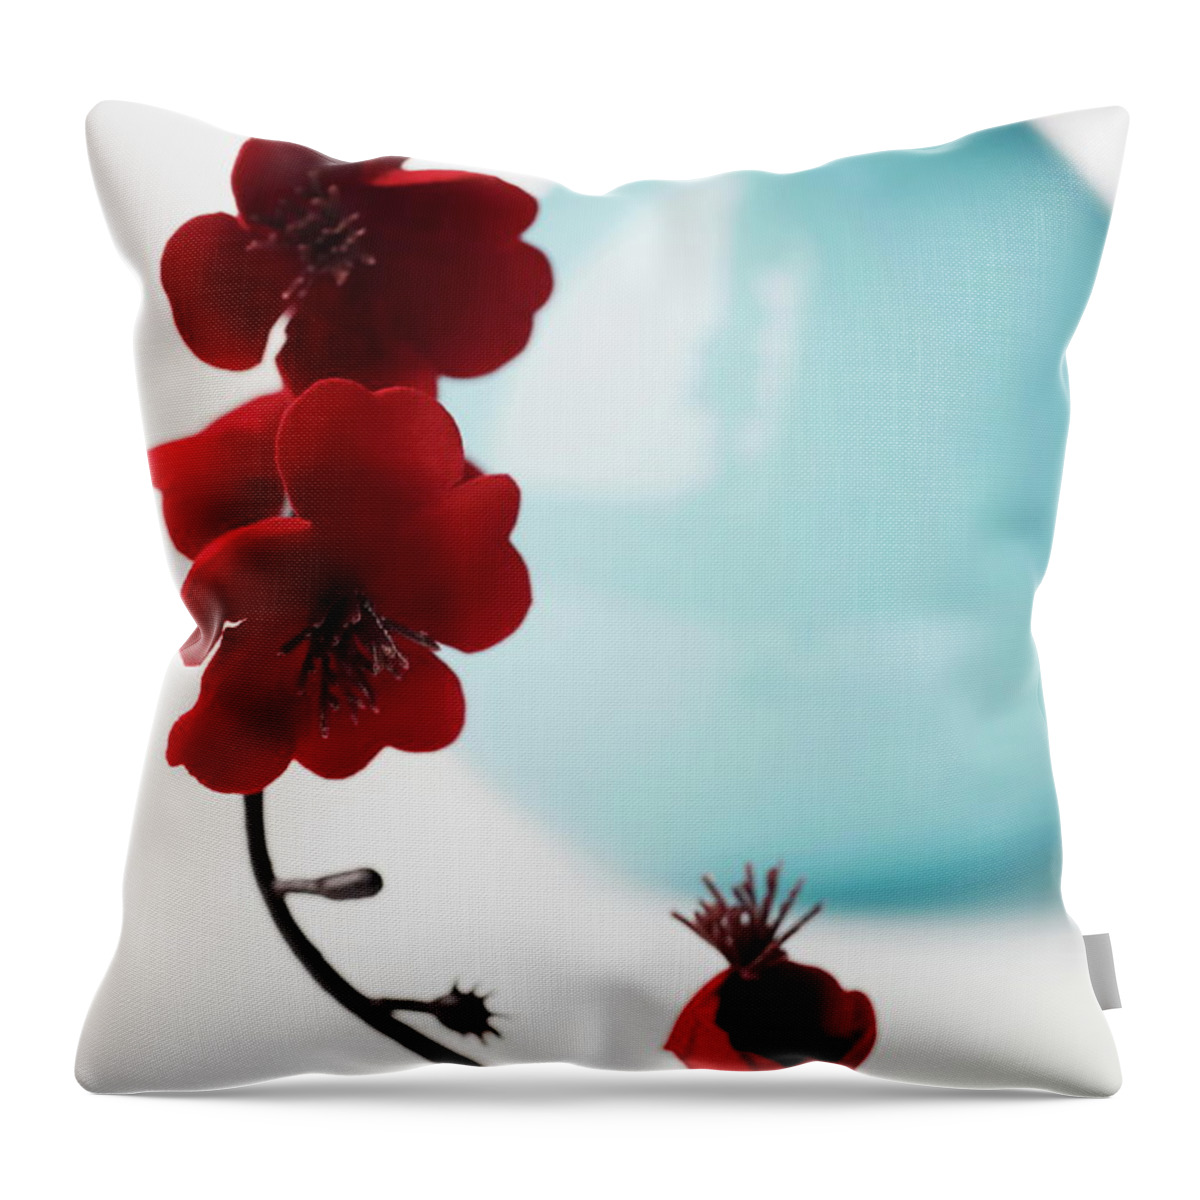 White Background Throw Pillow featuring the photograph Close-up Of A Branch Of Red Flowers In by Jack Hollingsworth